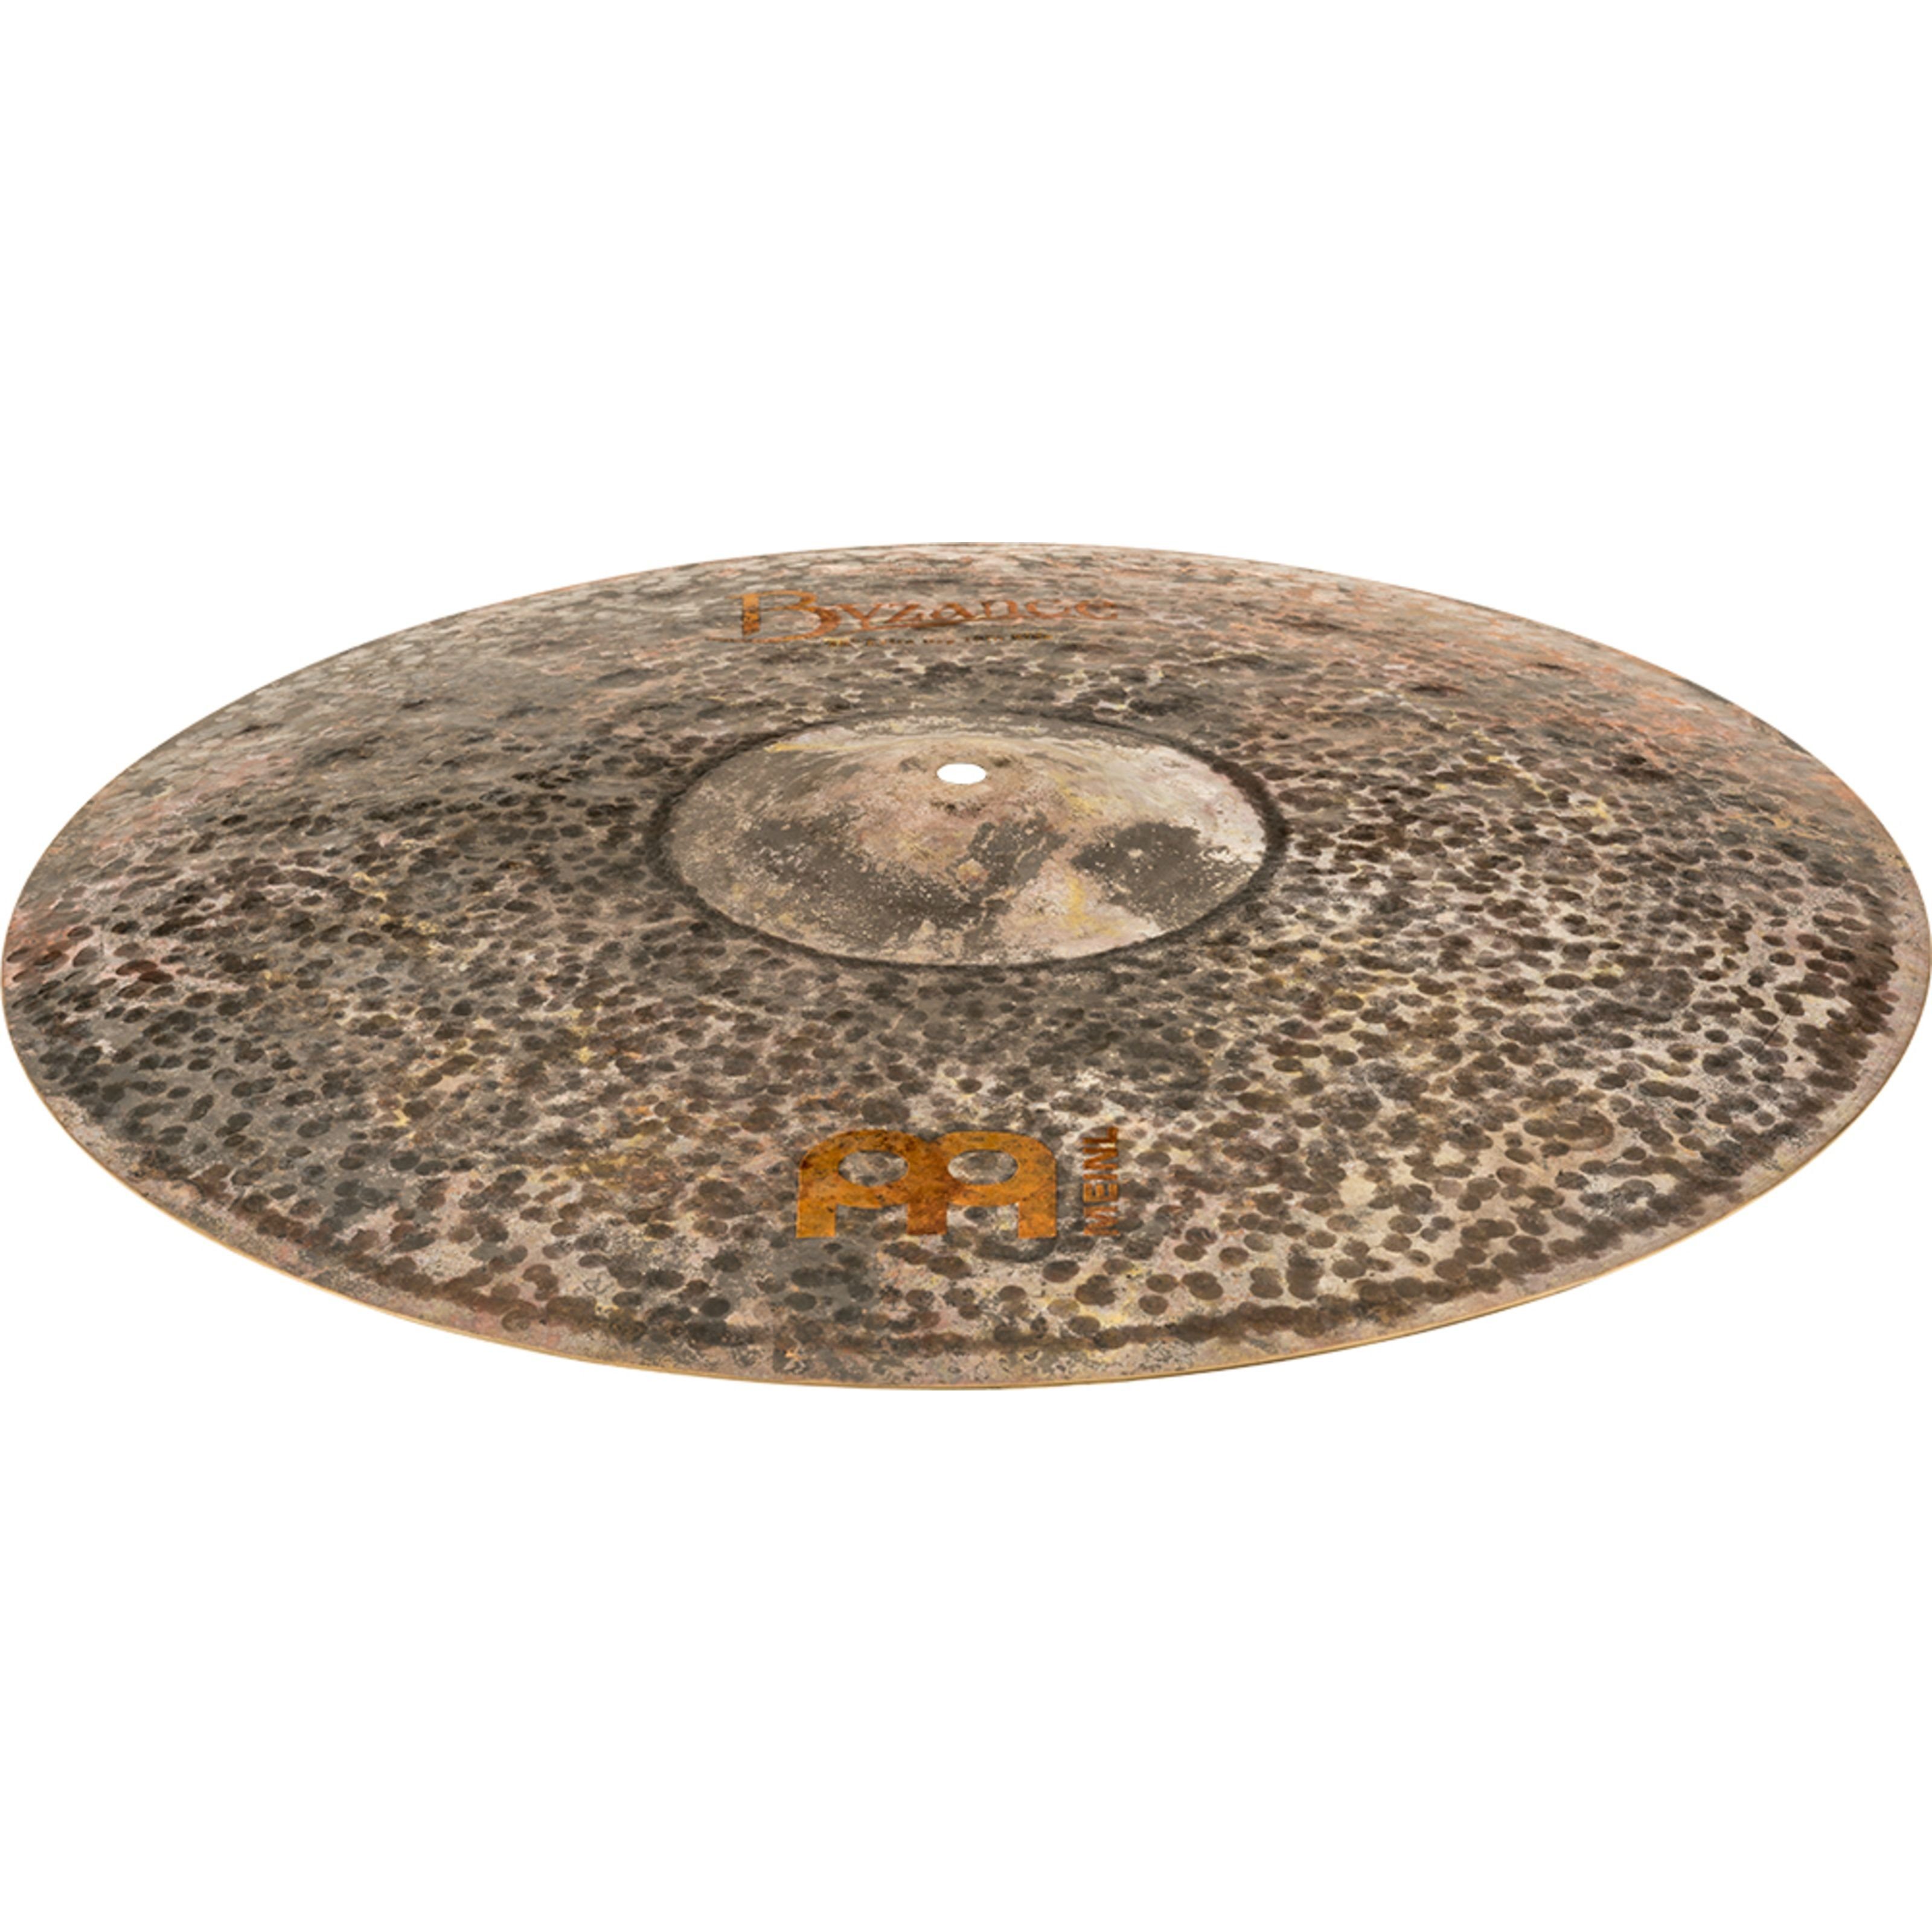 Meinl Percussion Spielzeug-Musikinstrument, Dry Ride Extra Byzance - Cymbal Ride 20", Thin B20EDTR